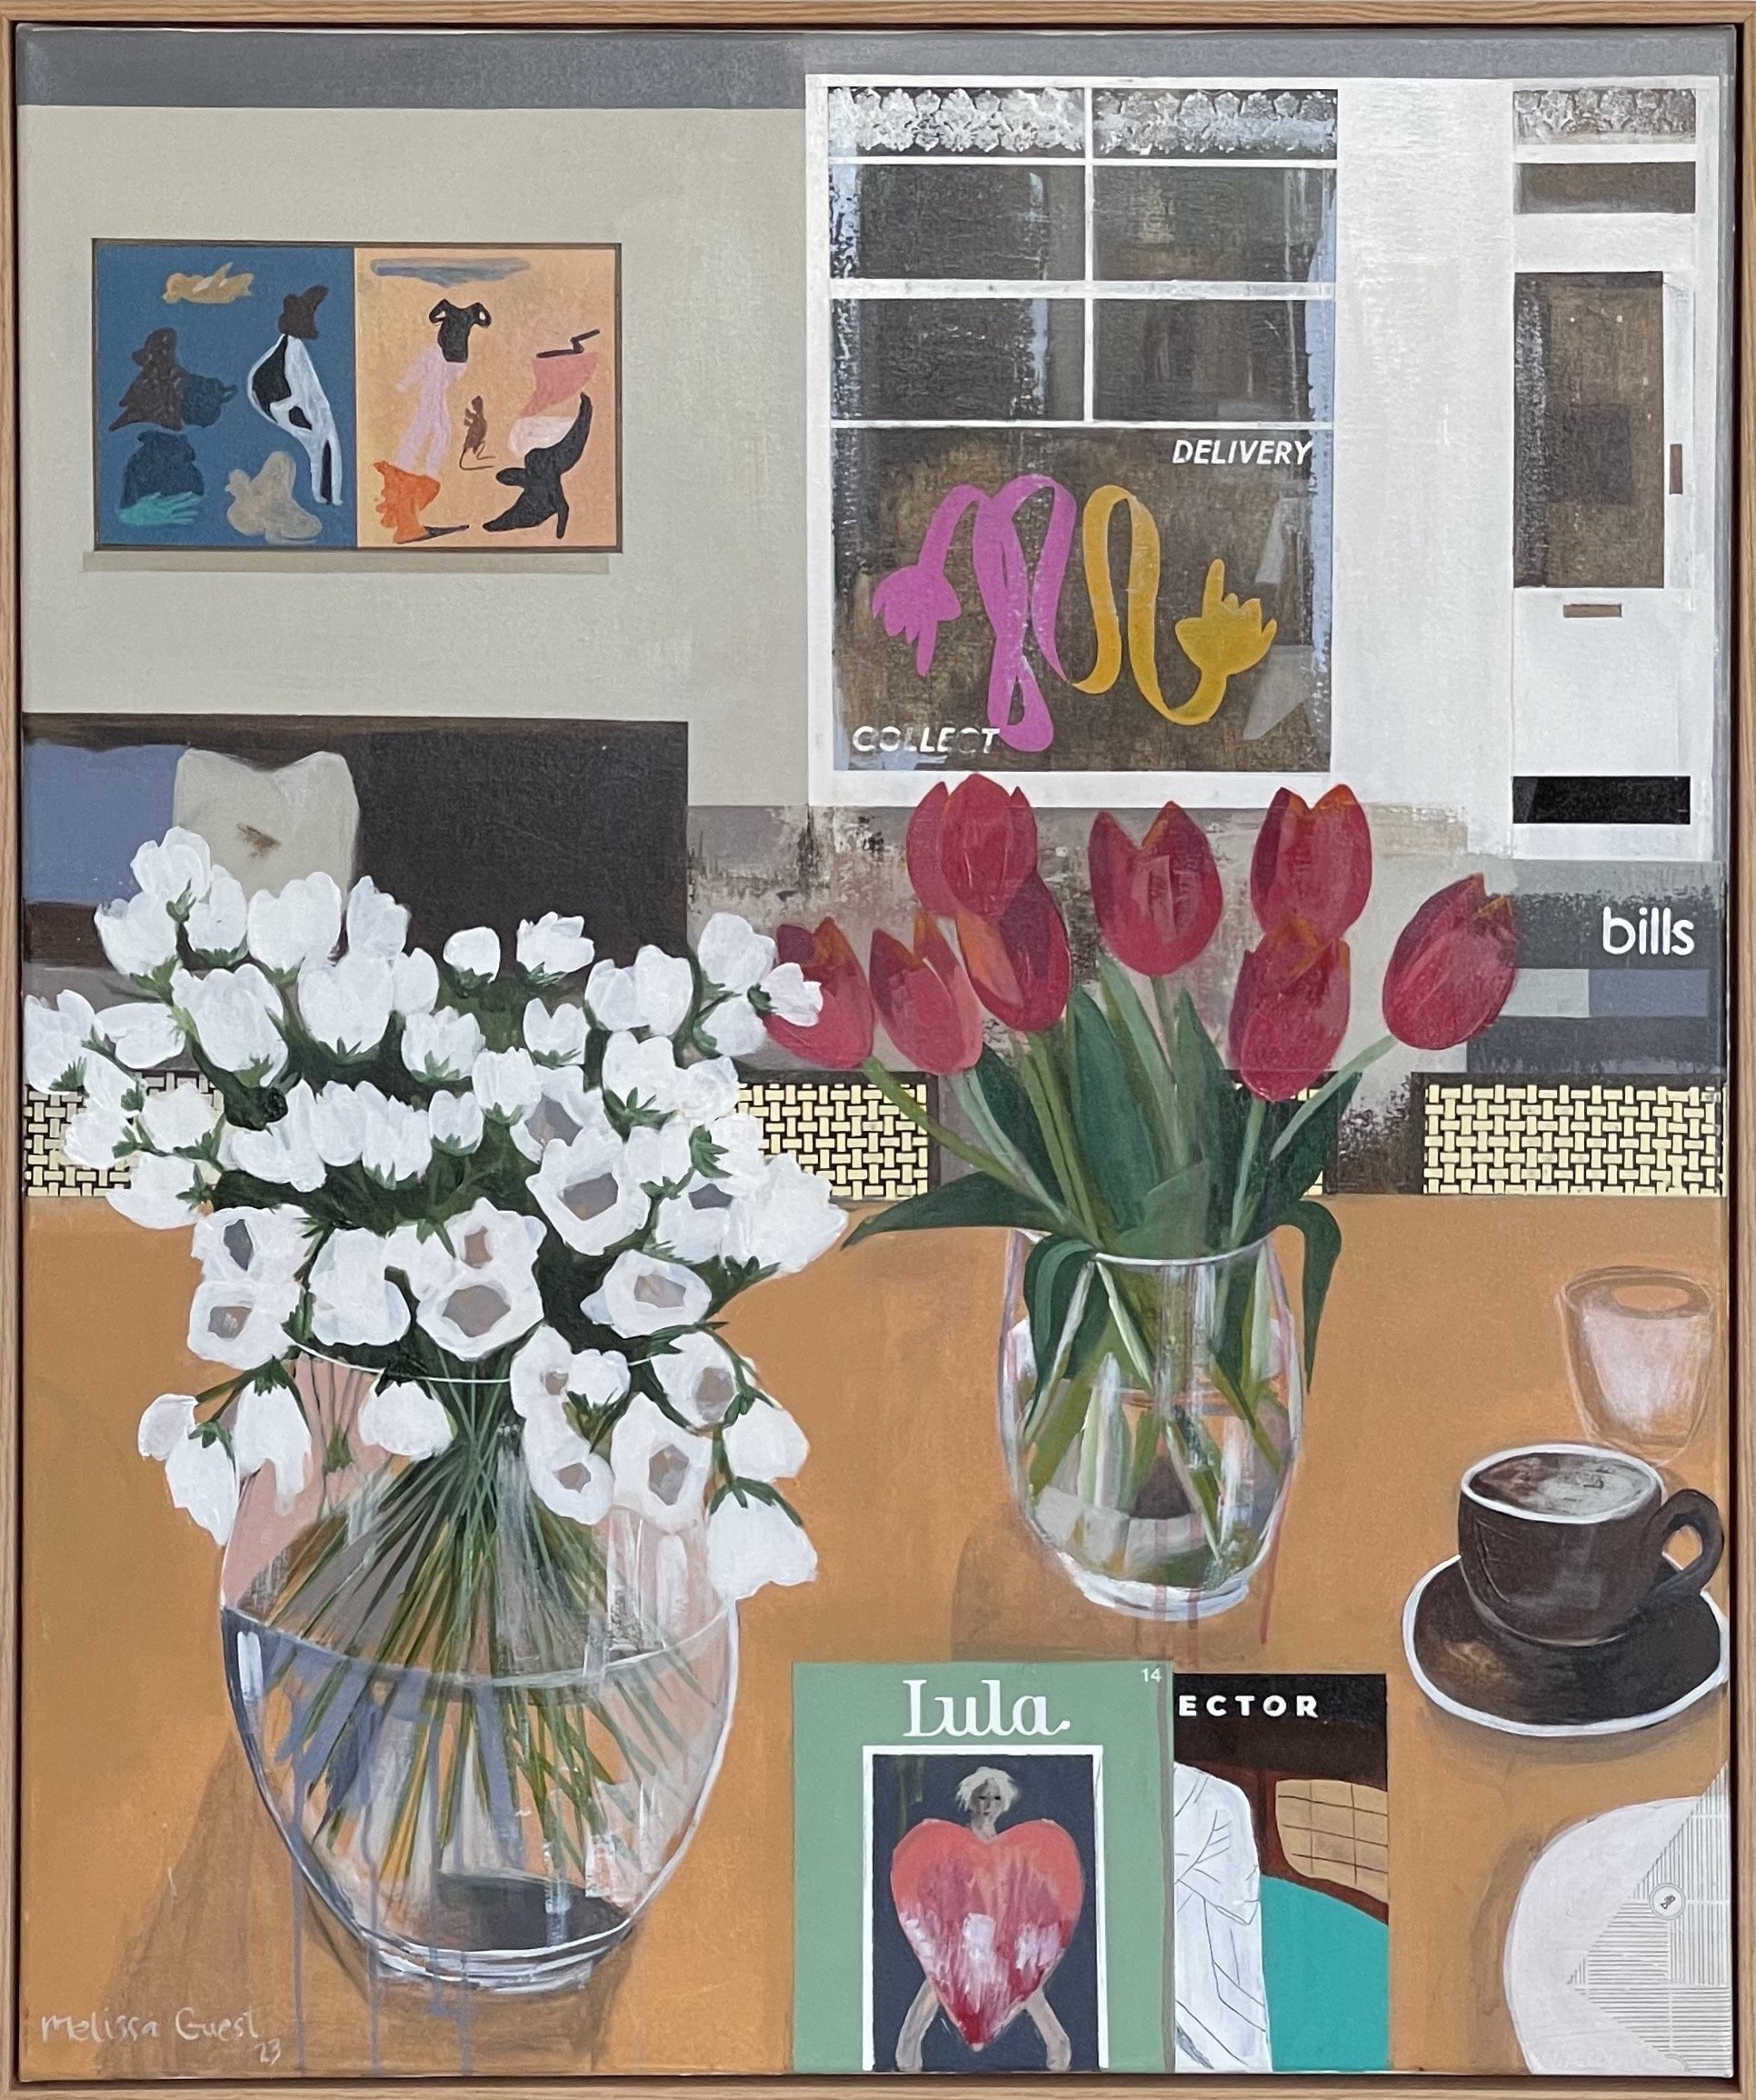 Breakfast At Bills With Tulips And White Flowers 92x76cm framed mixed media on canvas $3200